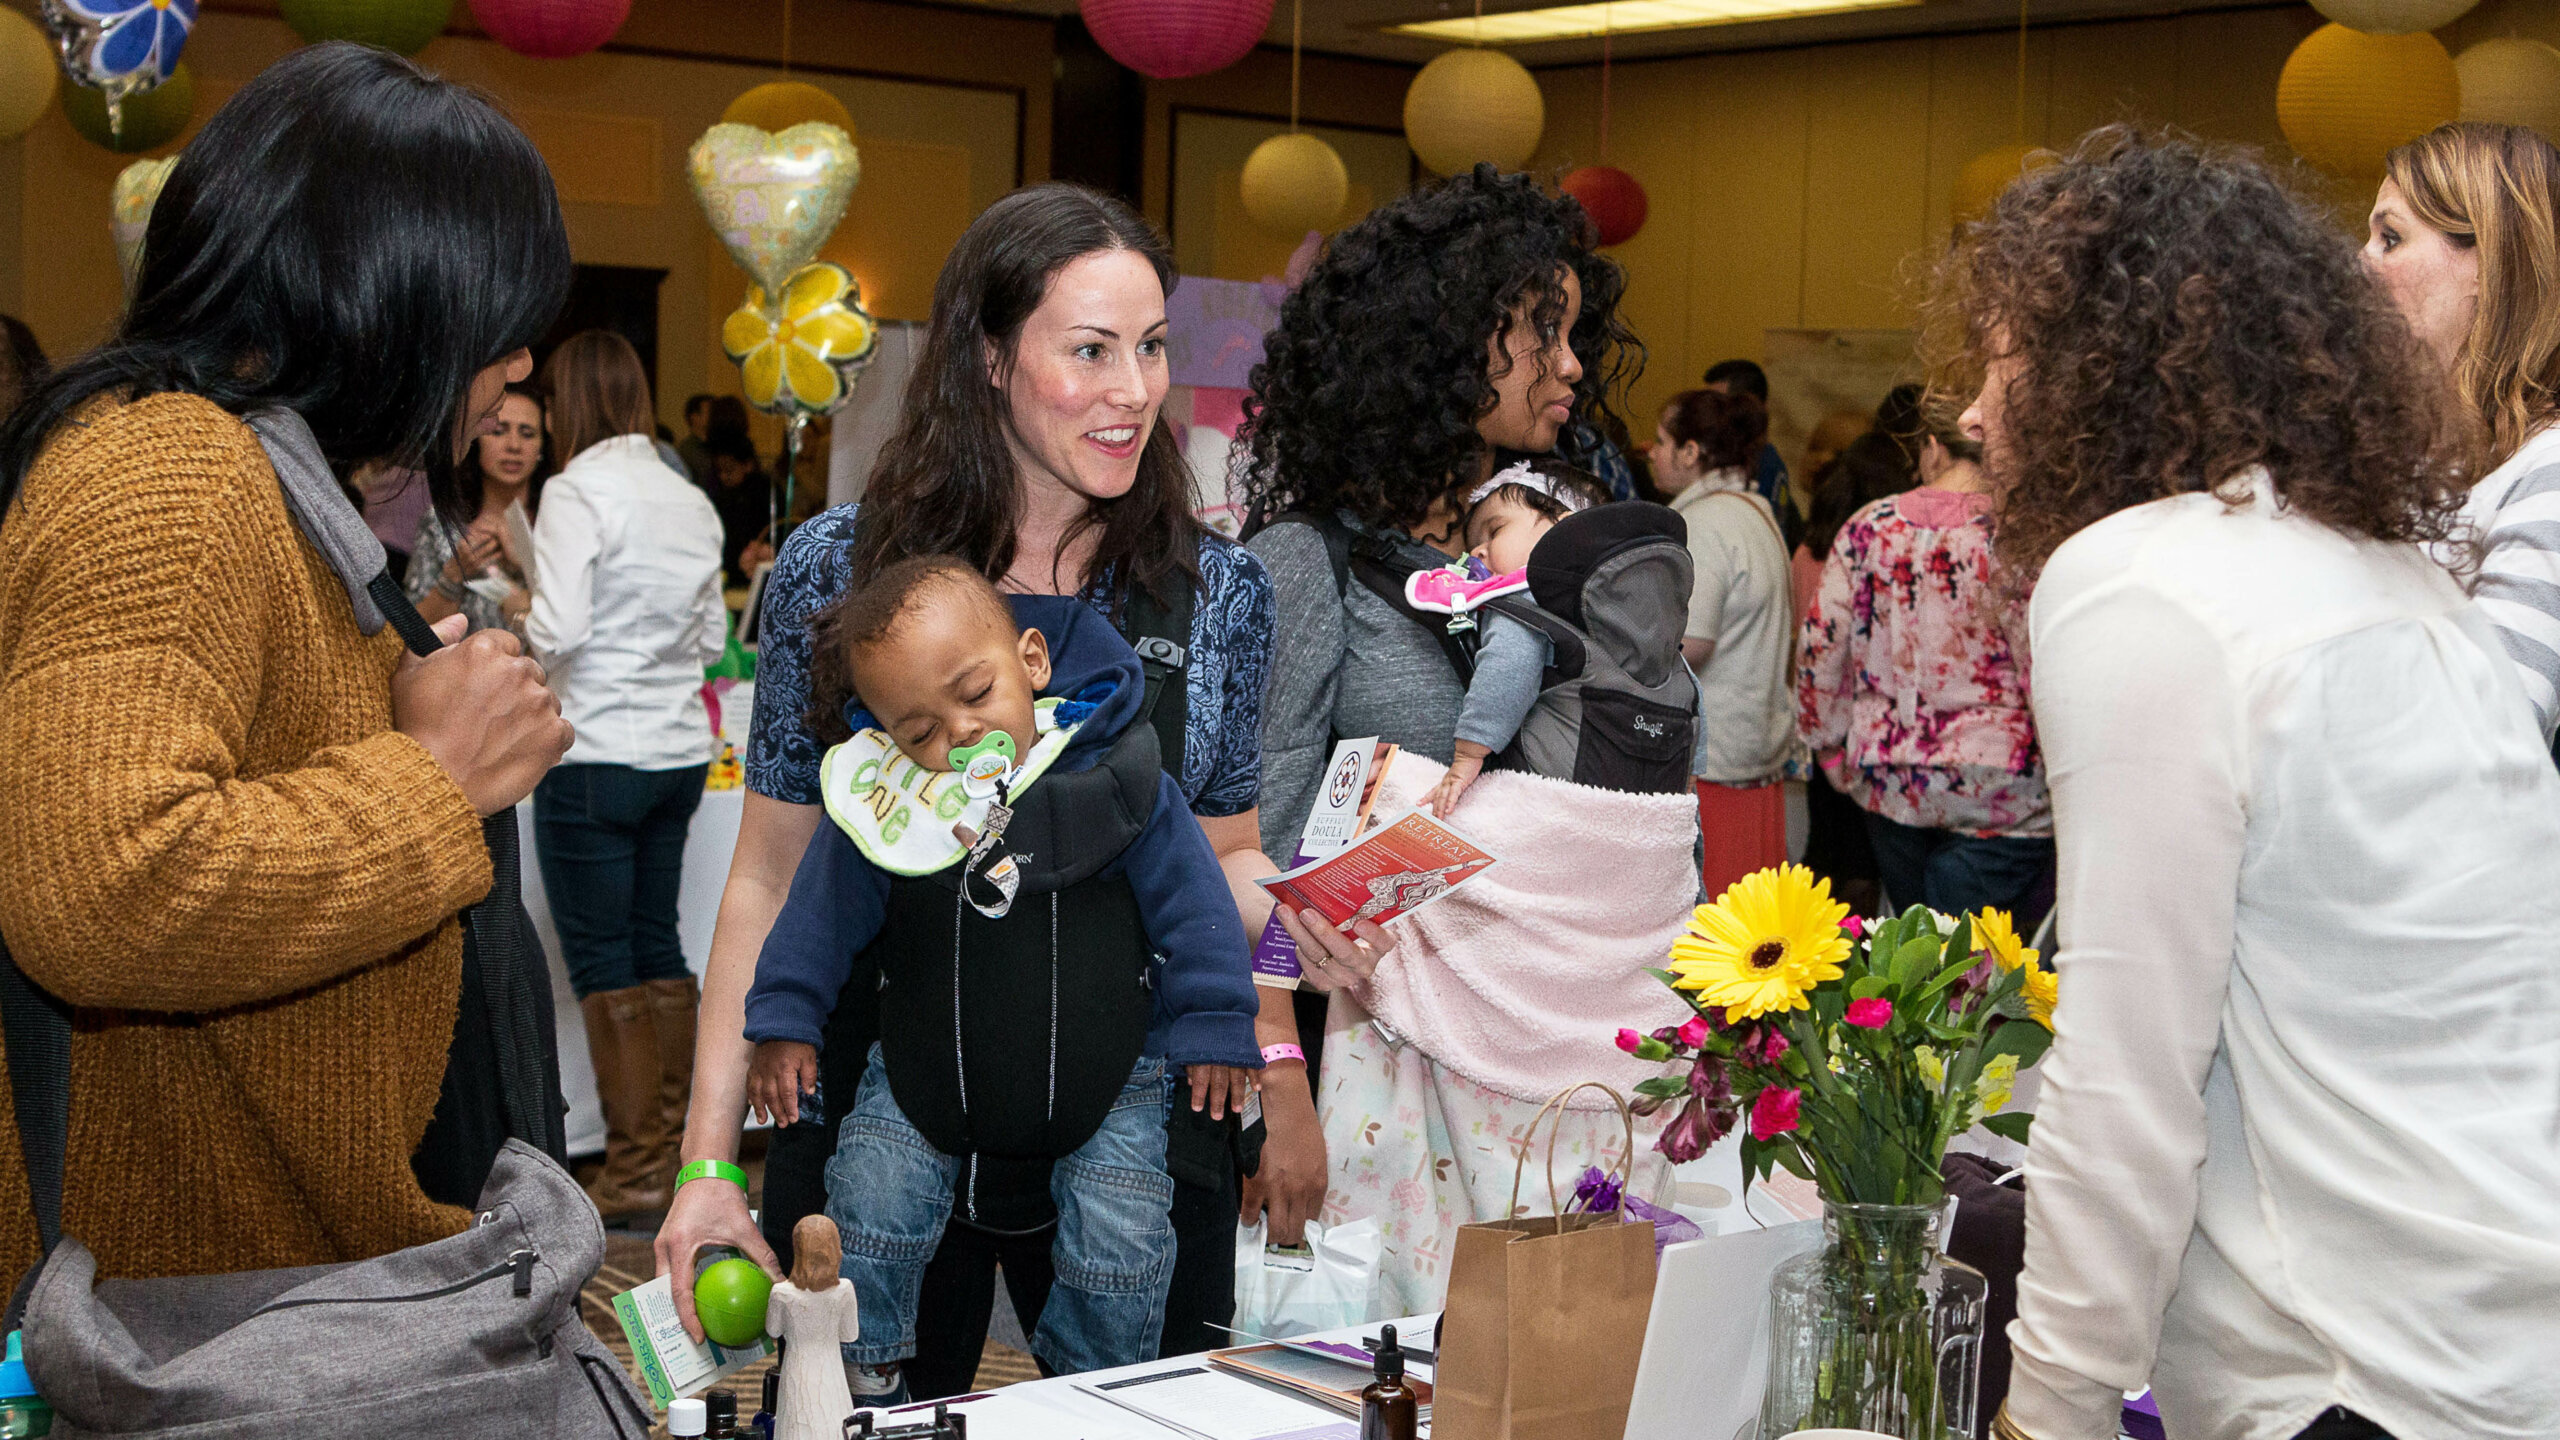 attendees and exhibitor at babies & bumps event